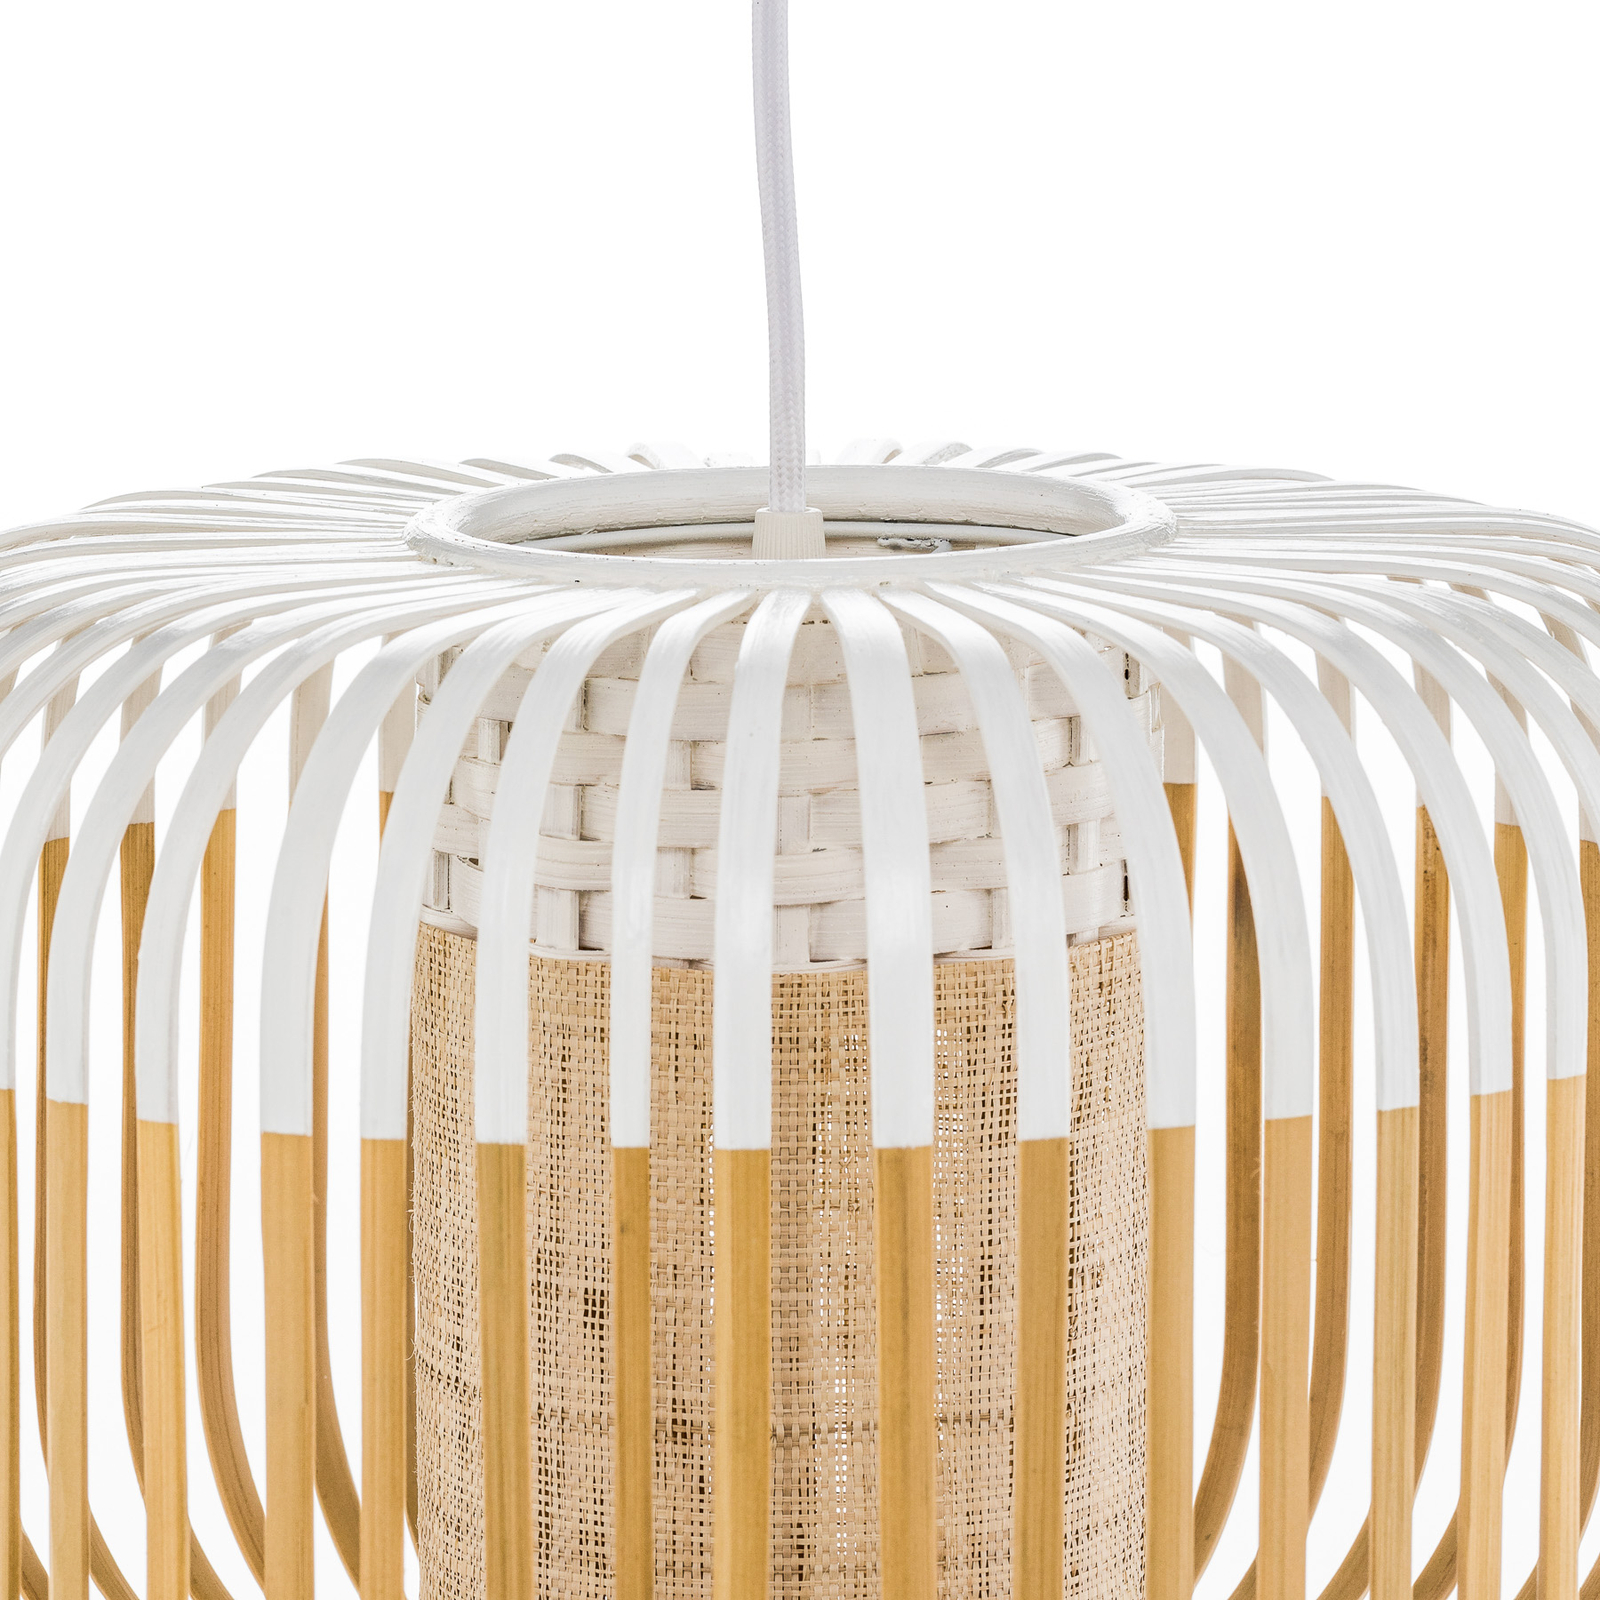 Forestier Bamboo Light S suspension 35 cm blanche